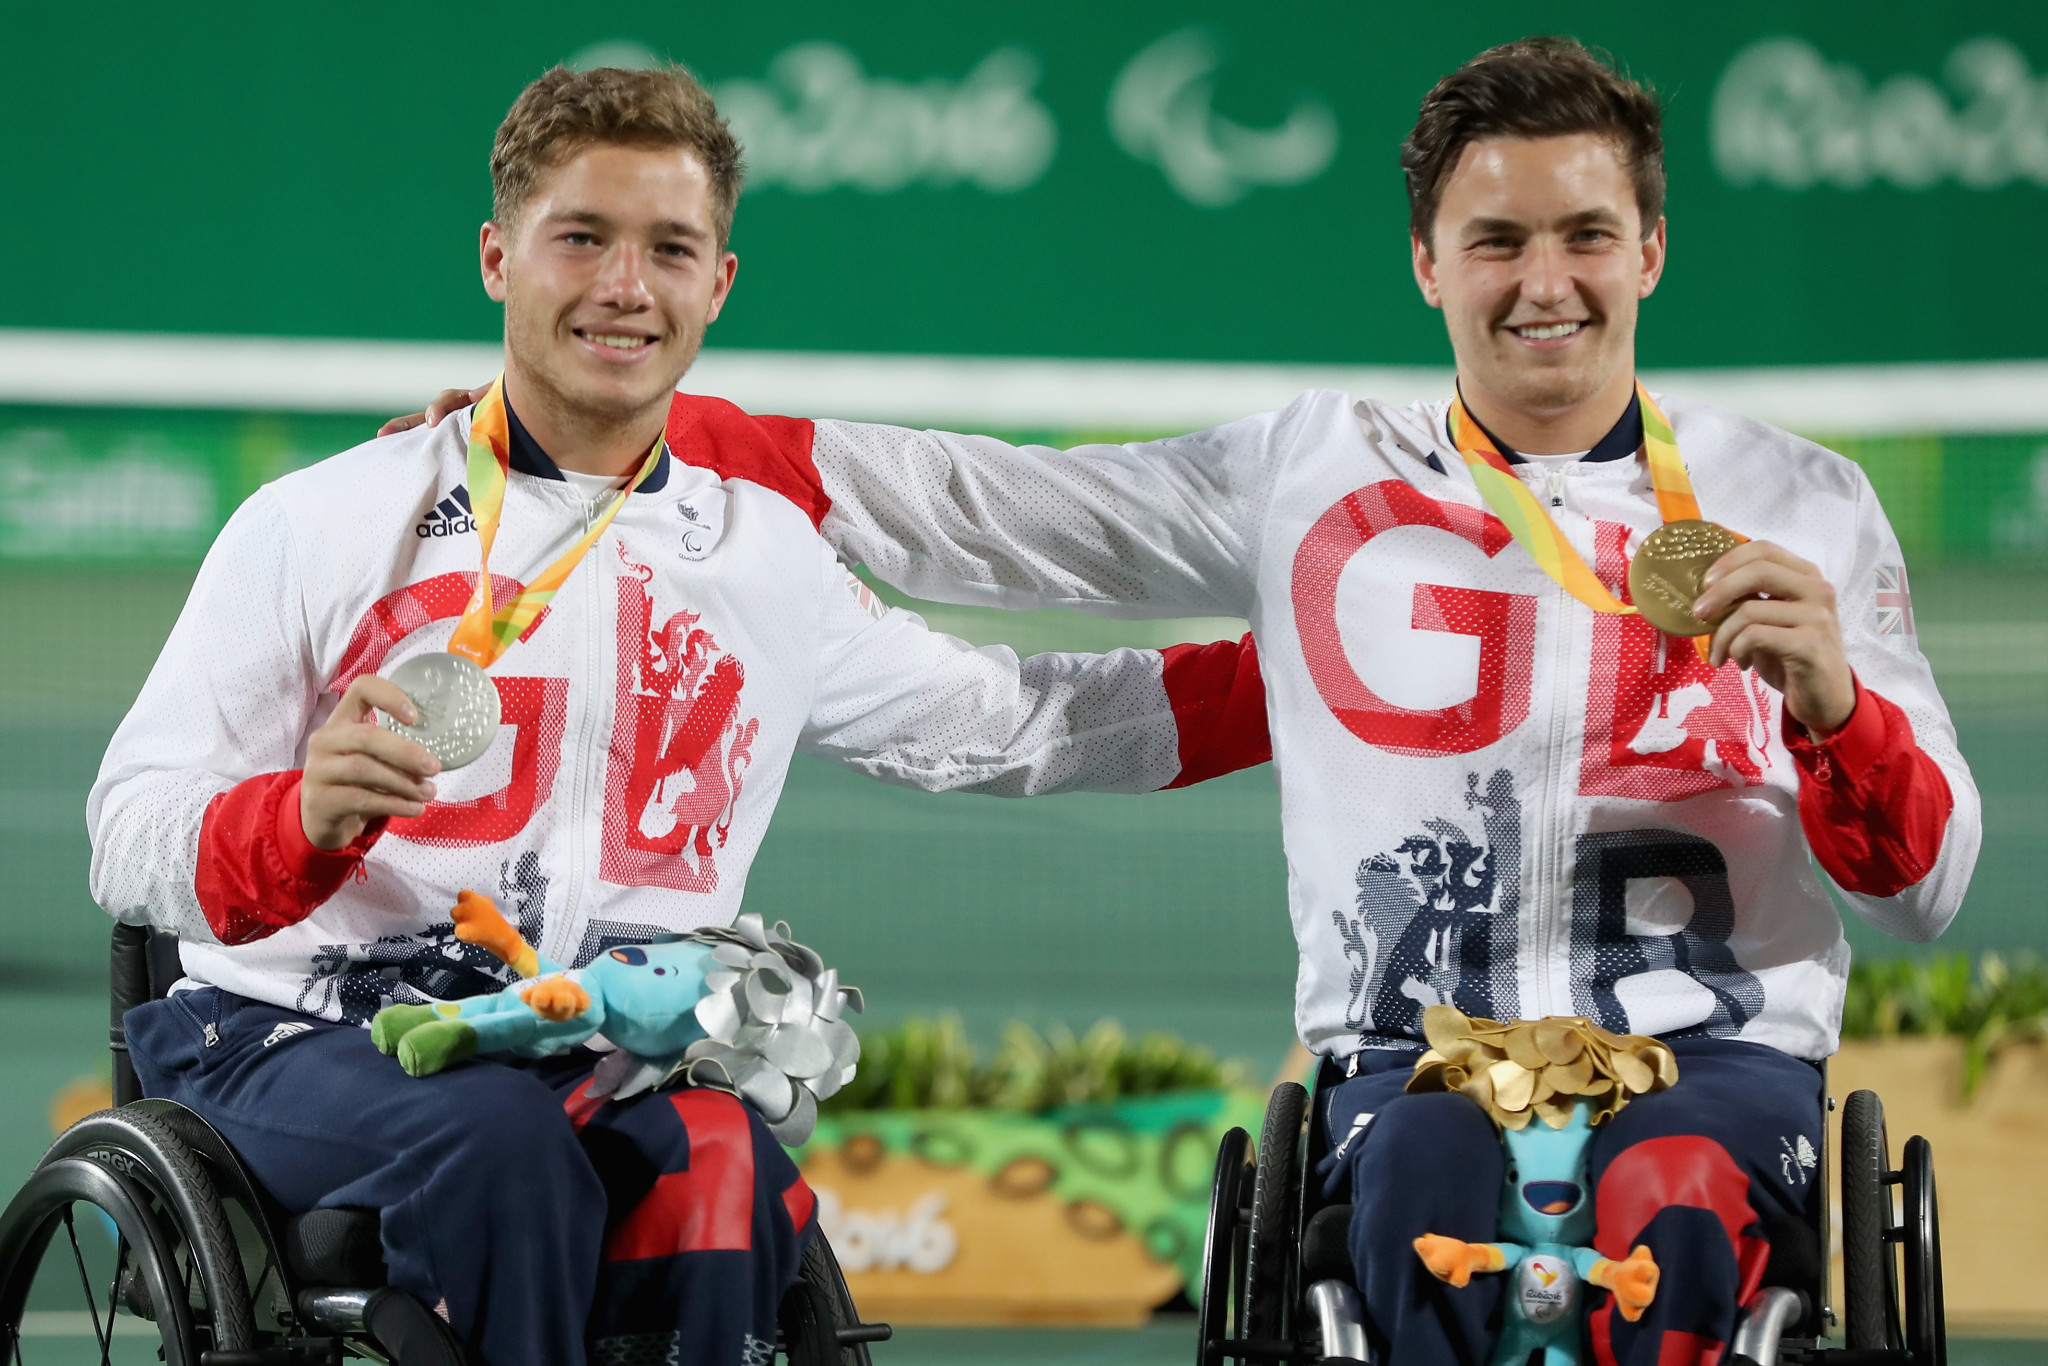 Alfie Hewett and Gordon Reid have been selected by Britain again for the Paralympics ©Getty Images